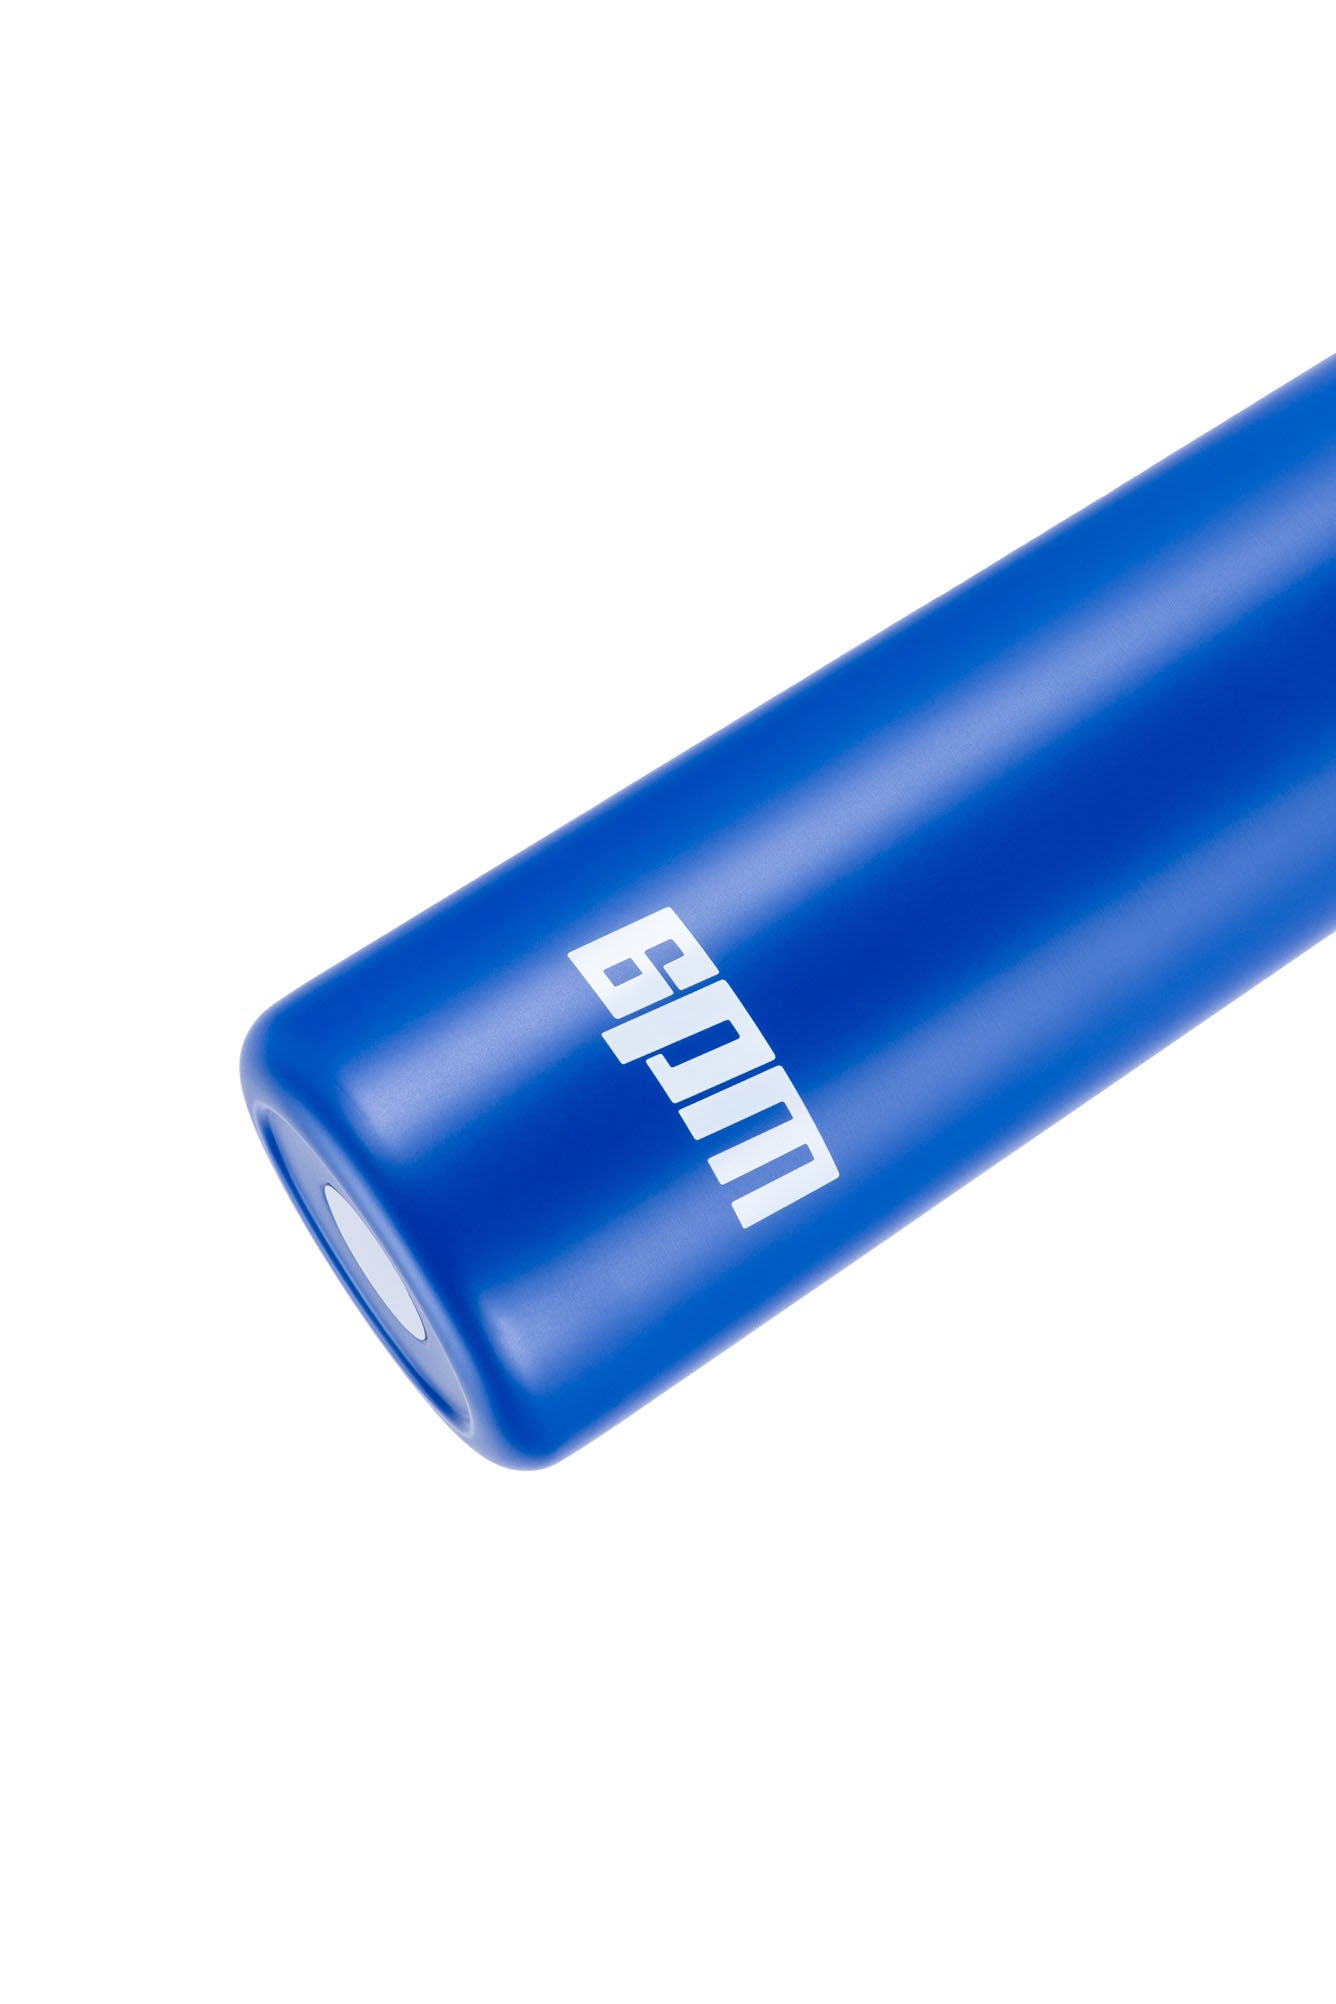 INSULATED BOTTLE BLUE